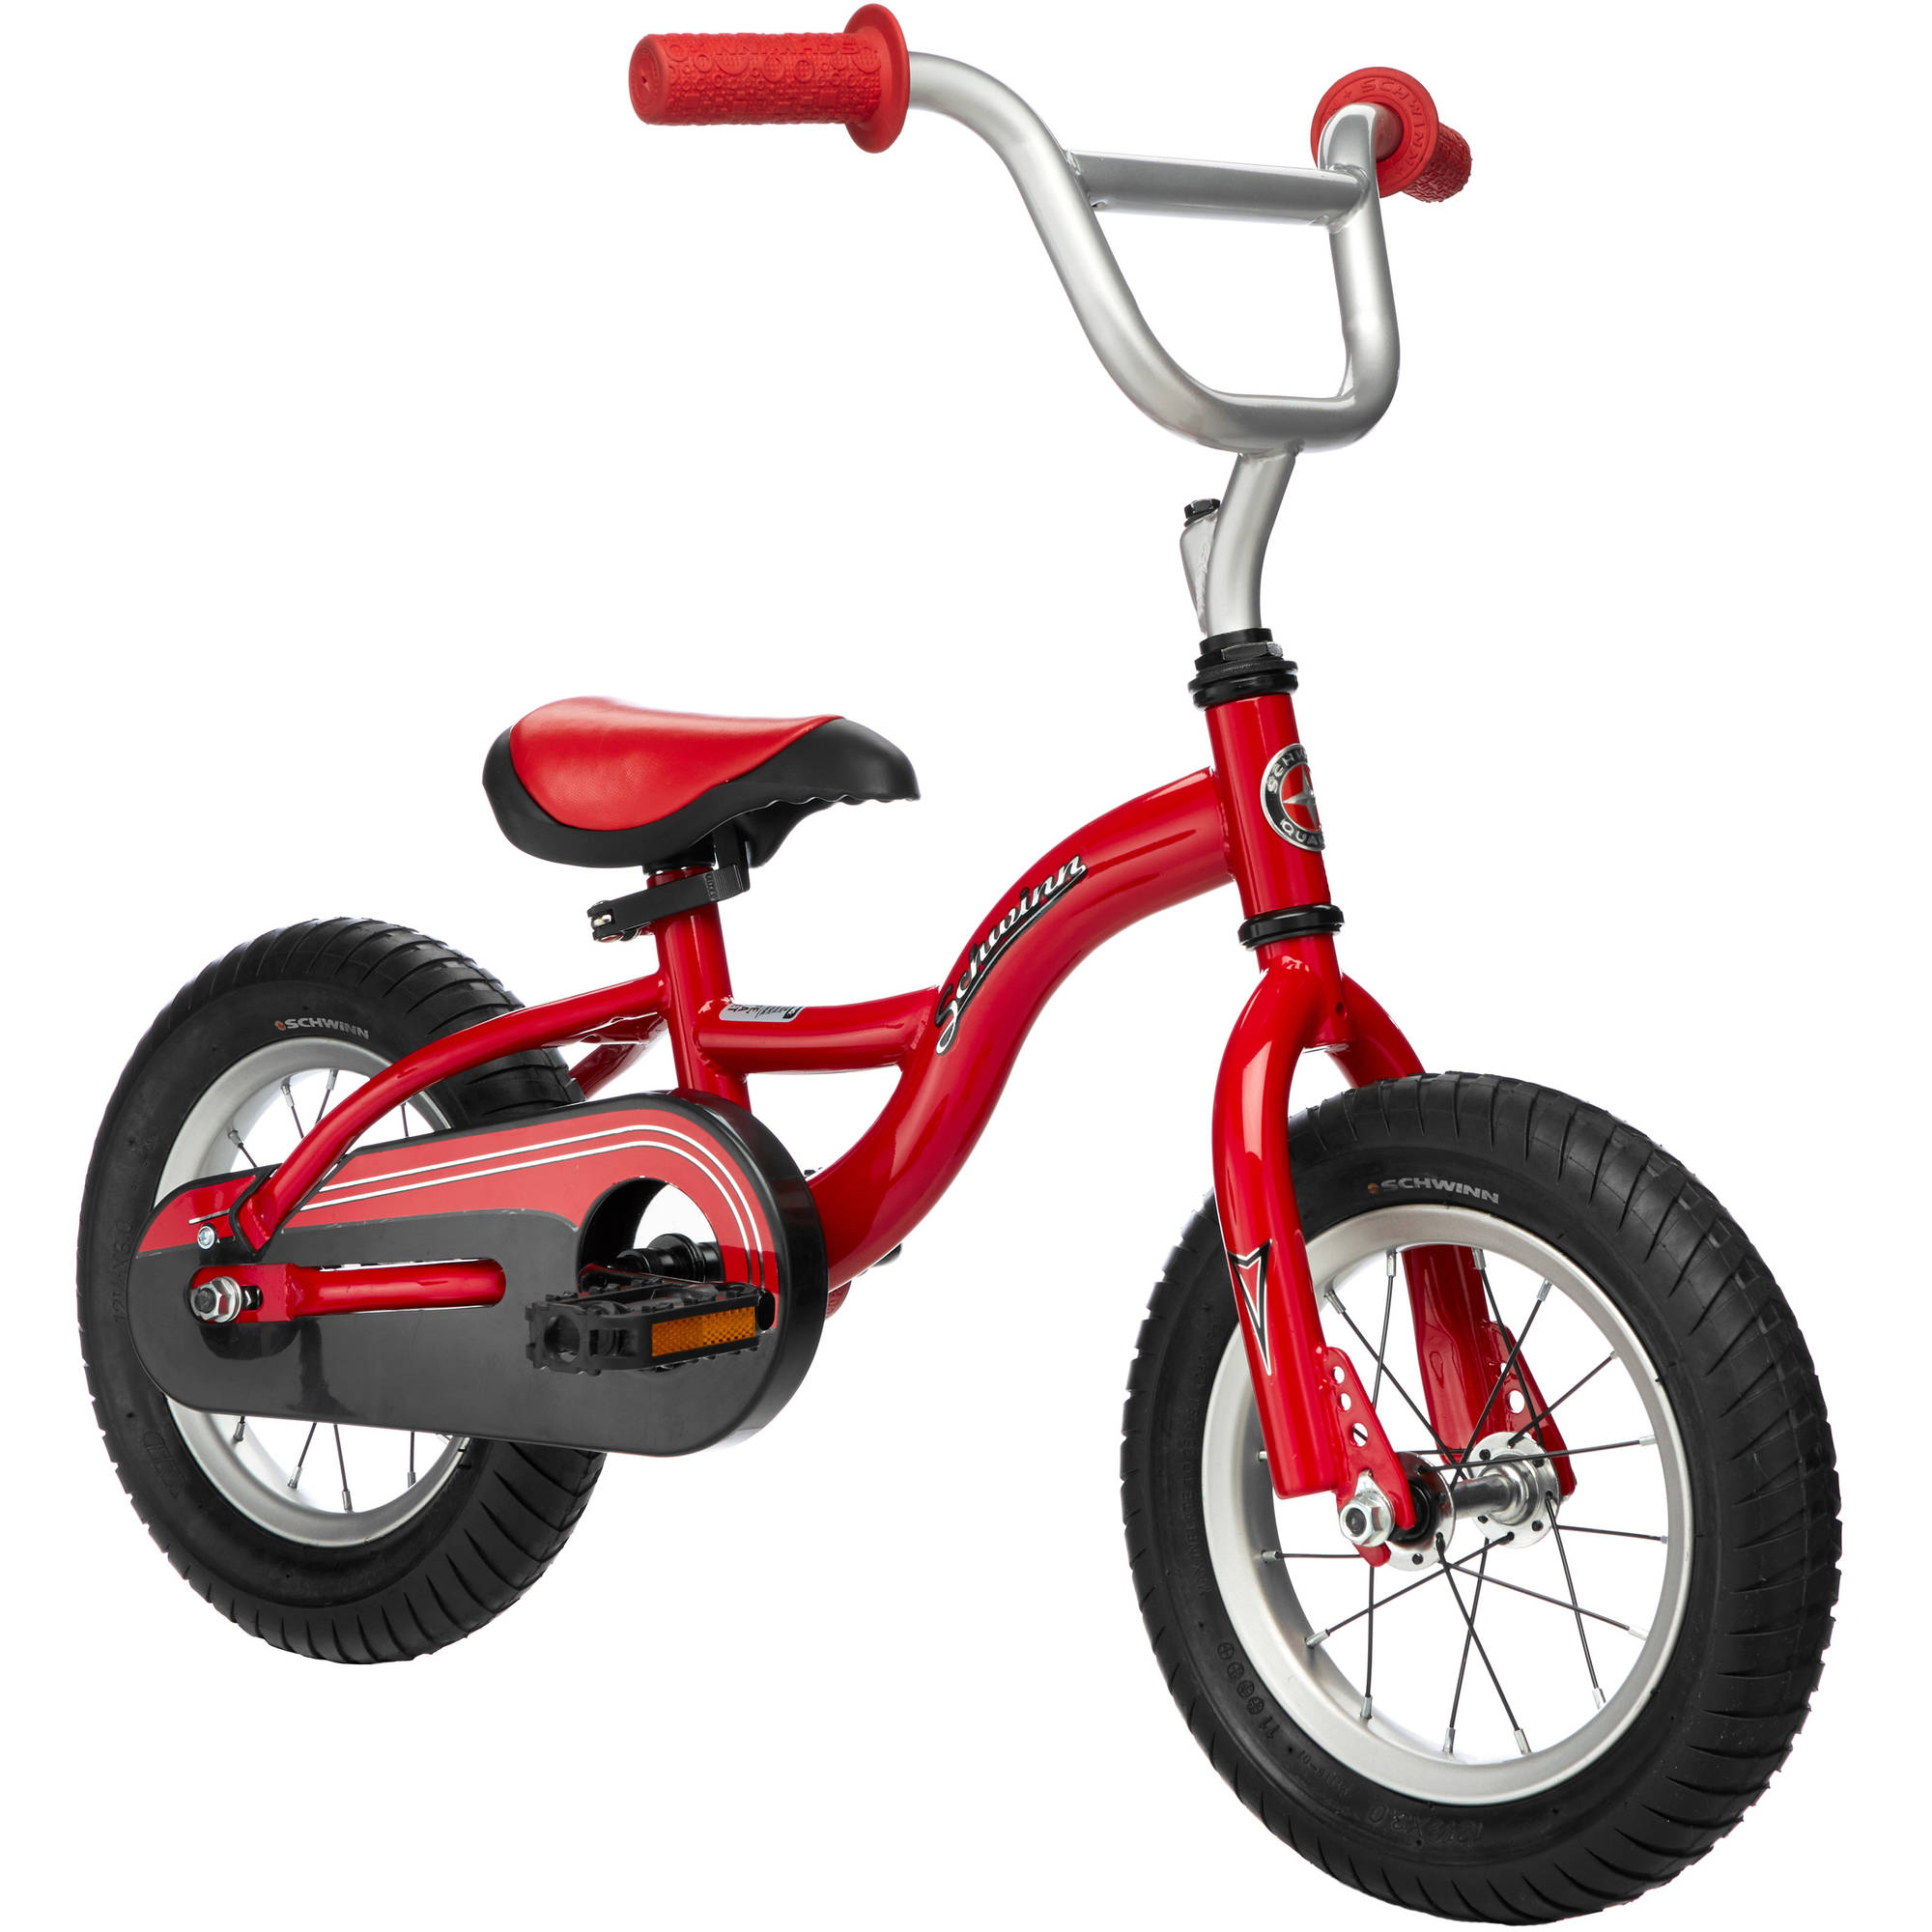 Kid red and black stand alone bicycle on a white background